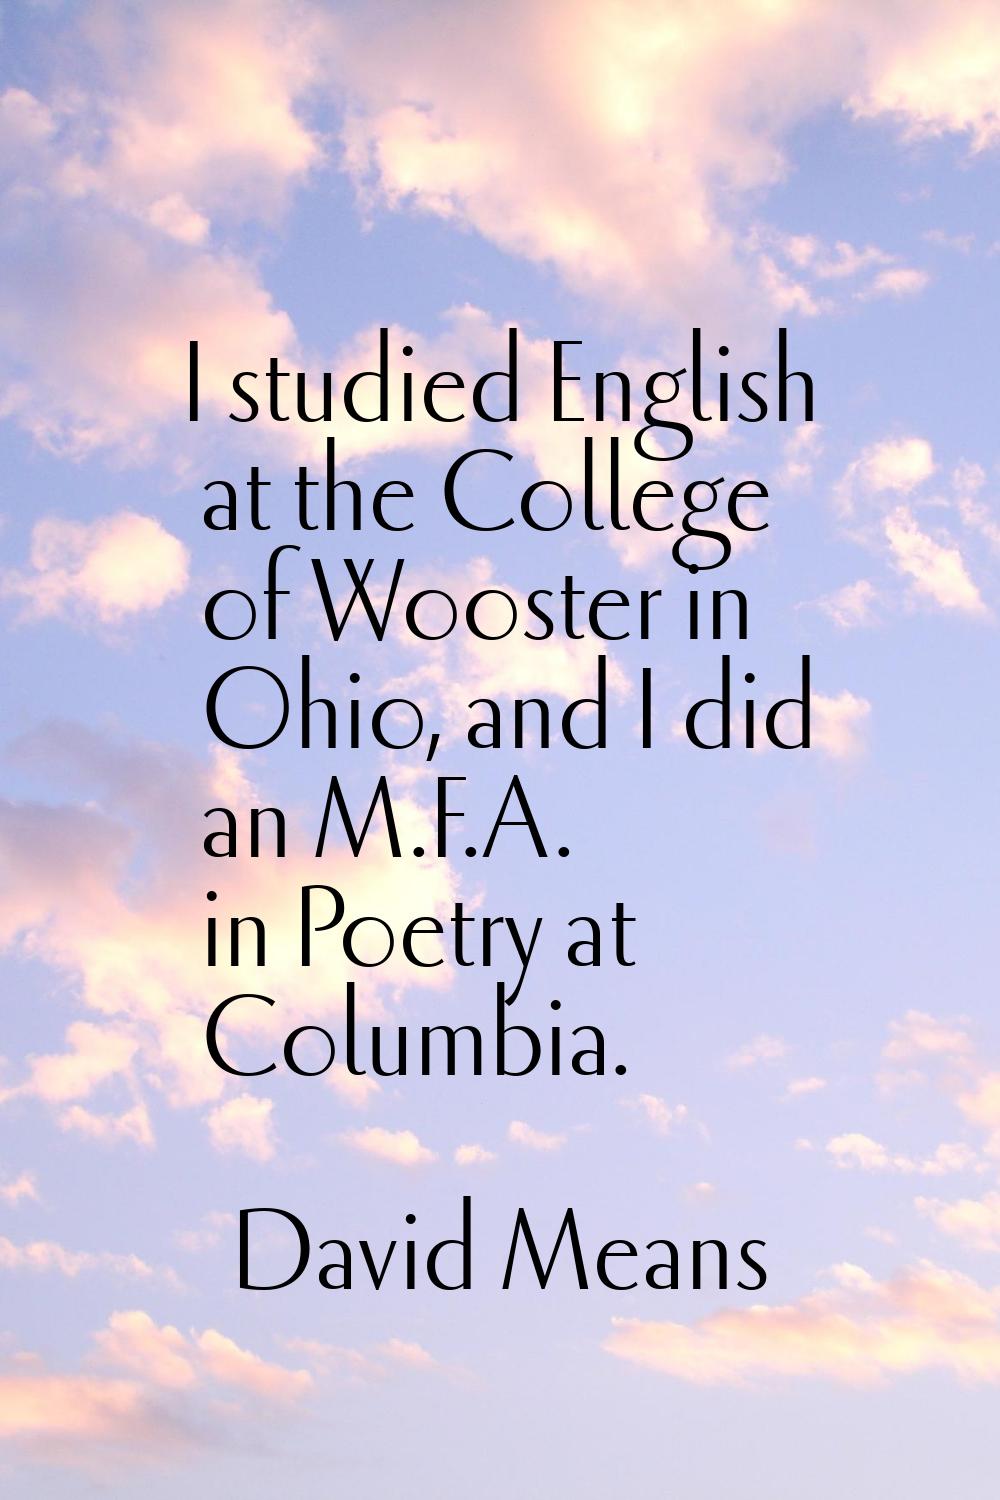 I studied English at the College of Wooster in Ohio, and I did an M.F.A. in Poetry at Columbia.